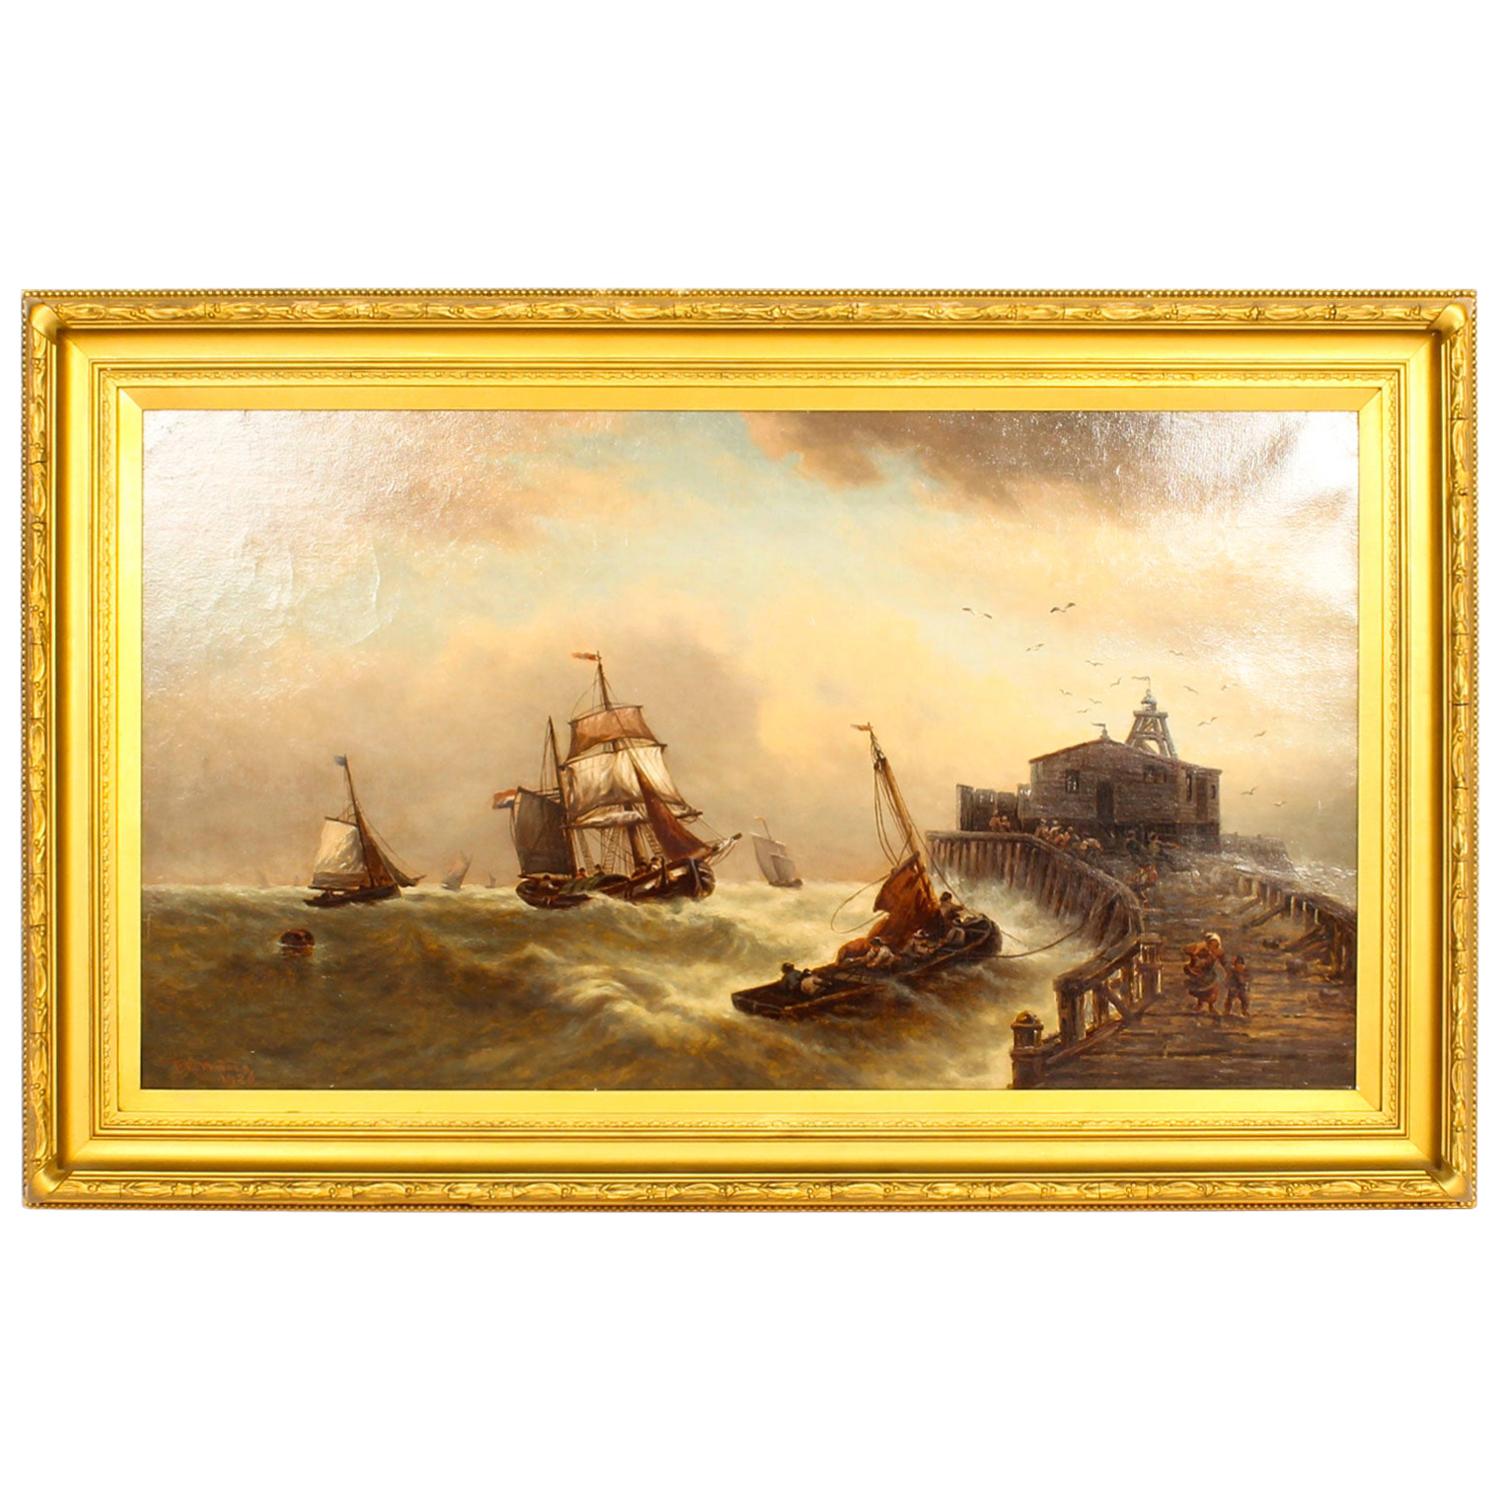 Antique Stormy Seascape Painting by David Horatio Winder, 1926